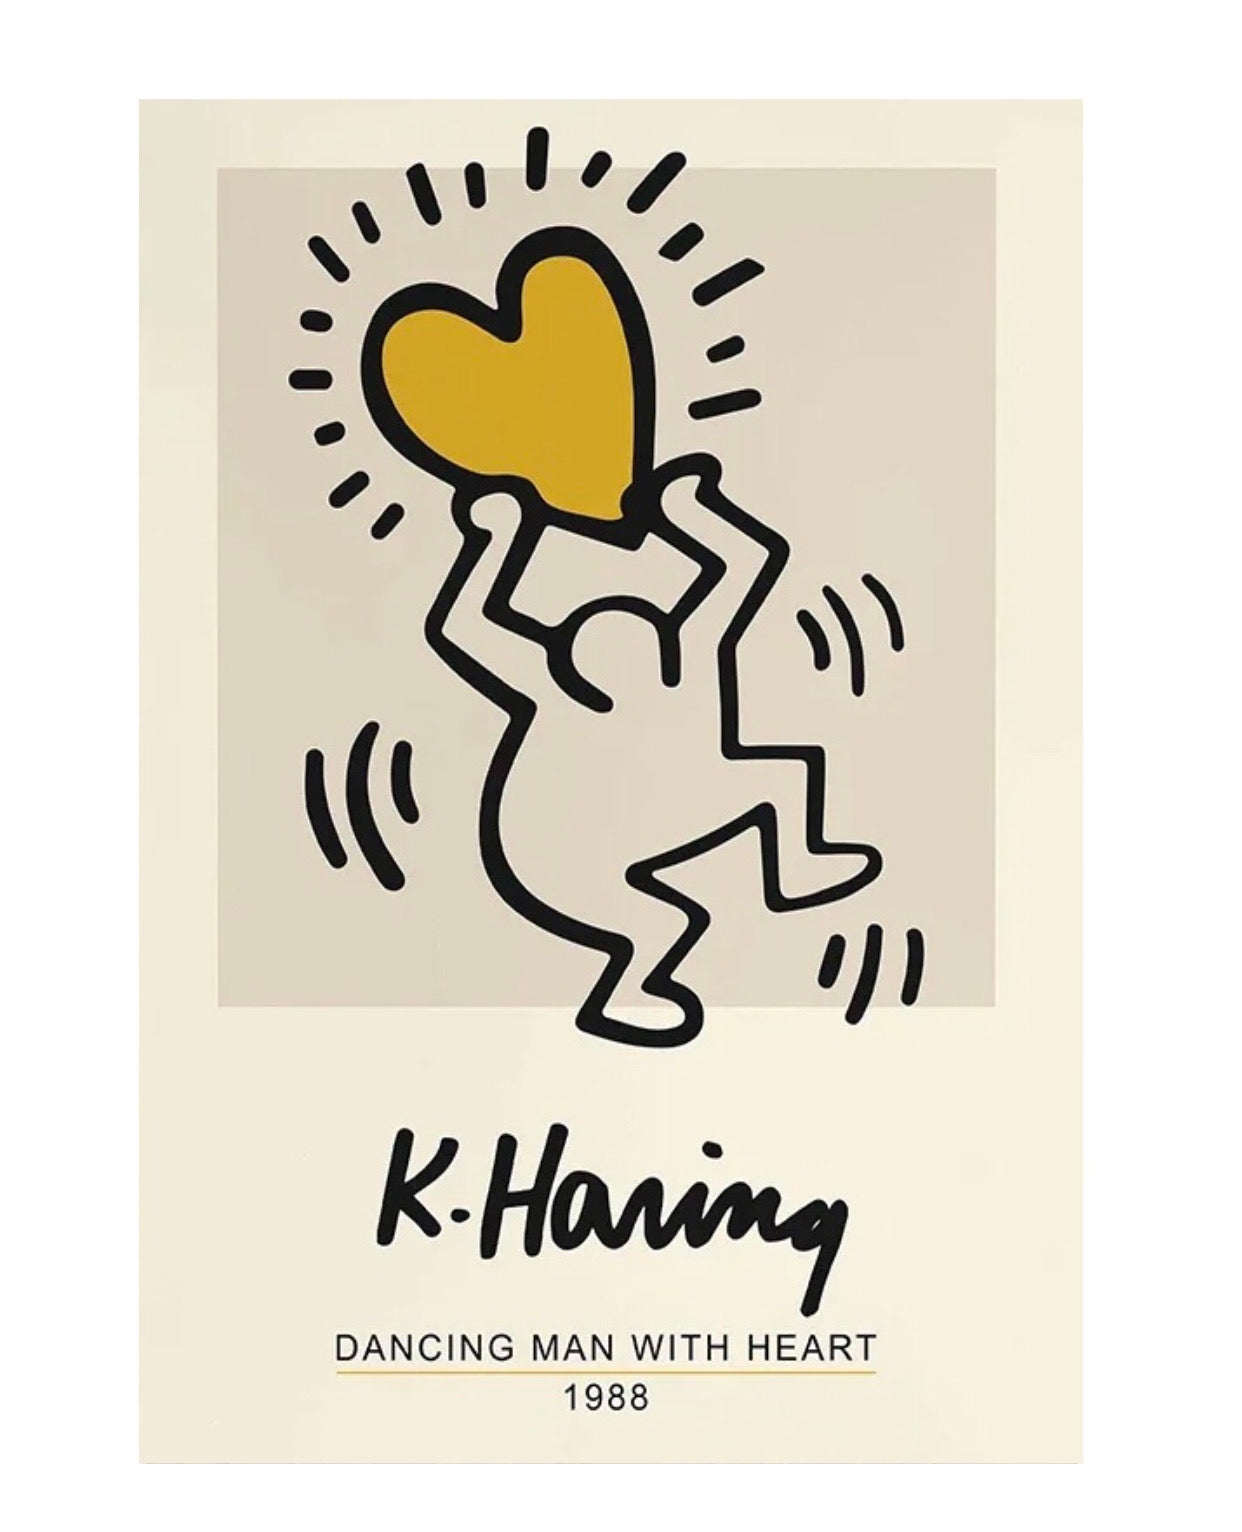 "dancing man with heart" poster